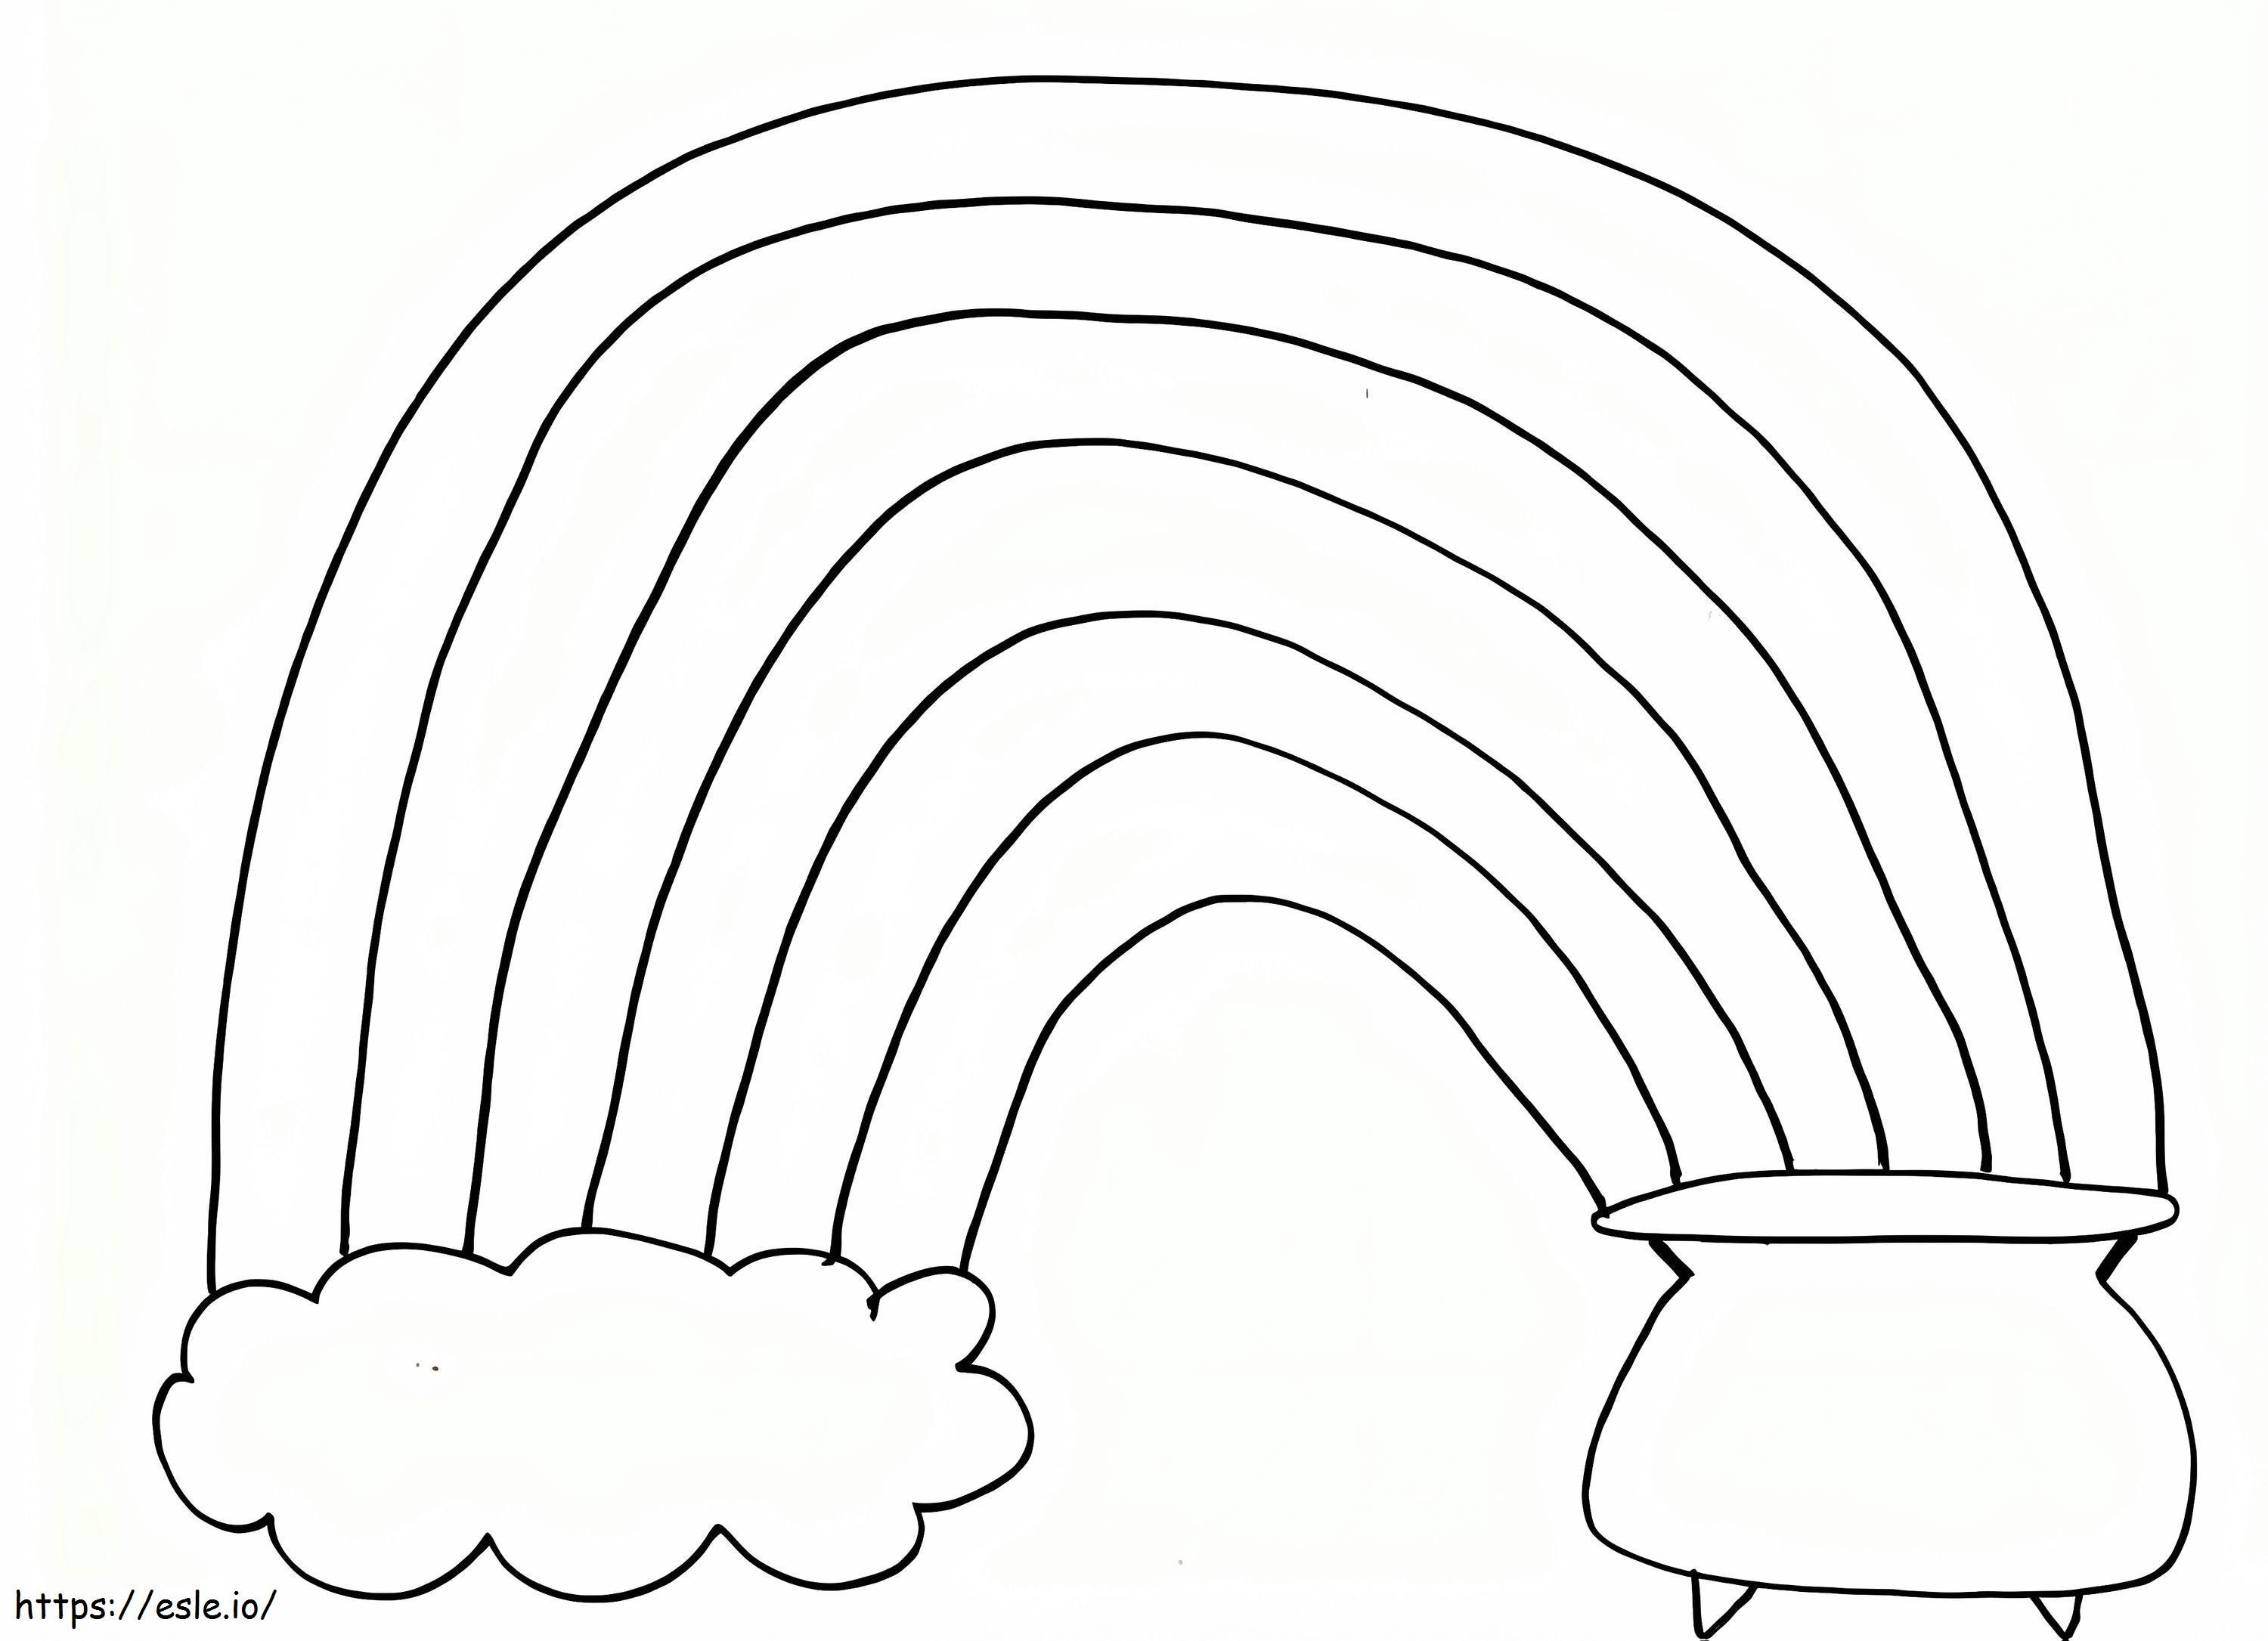 Pot Of Gold 5 coloring page